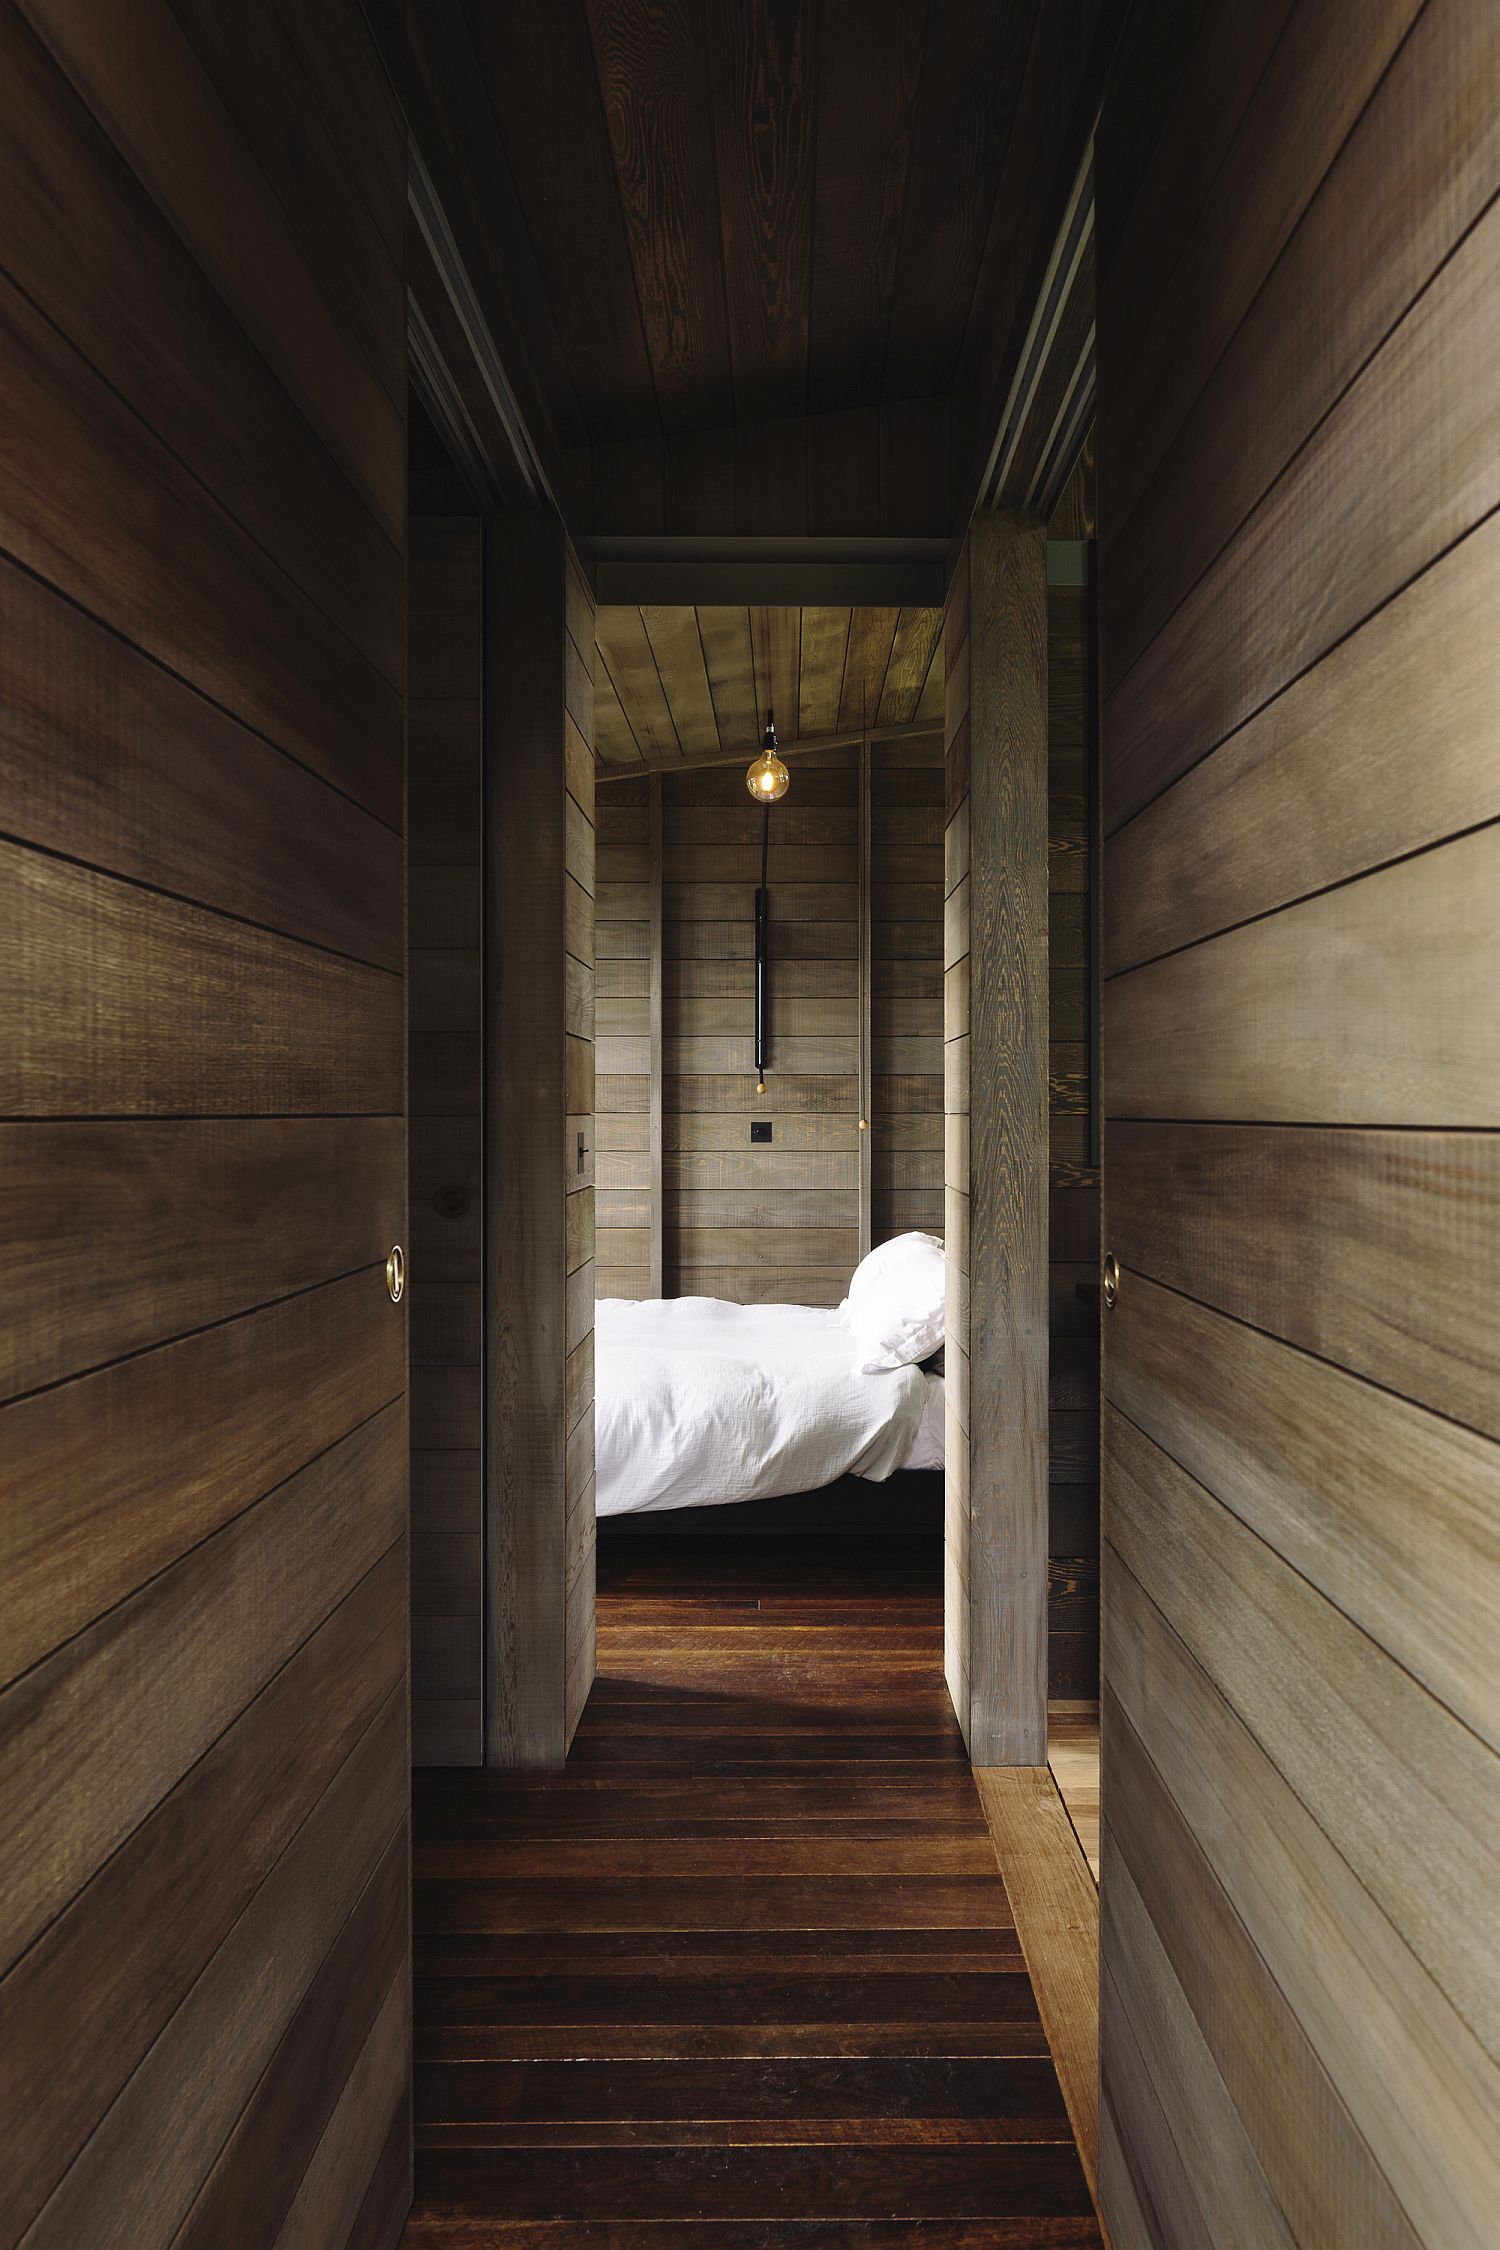 Corridors-leading-to-the-bedroom-of-the-woodsy-cabin